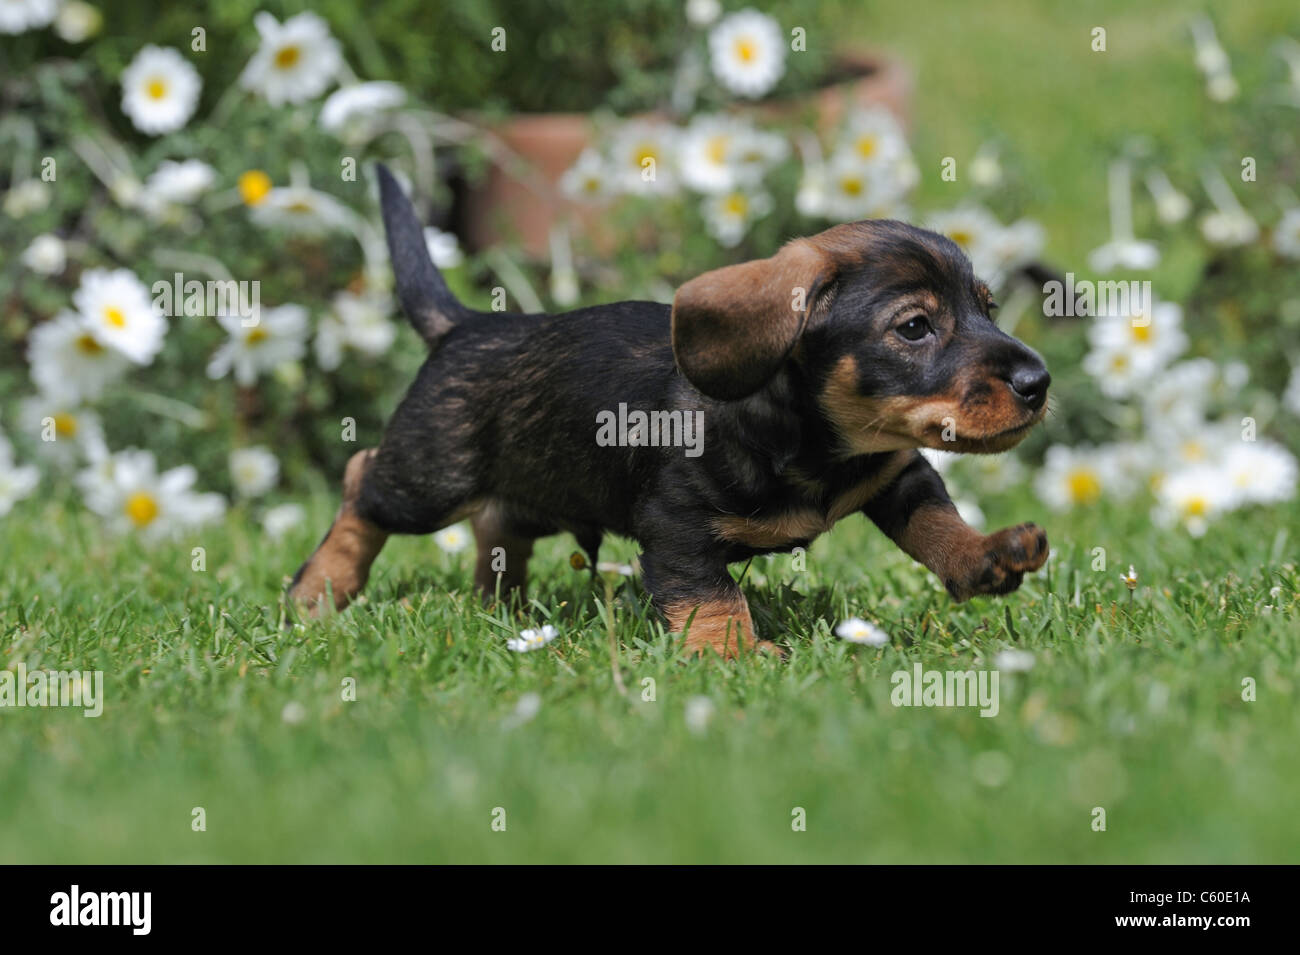 Wire-haired Dachshund (Canis lupus familiaris). Puppy running on a lawn in a flowering garden. Stock Photo